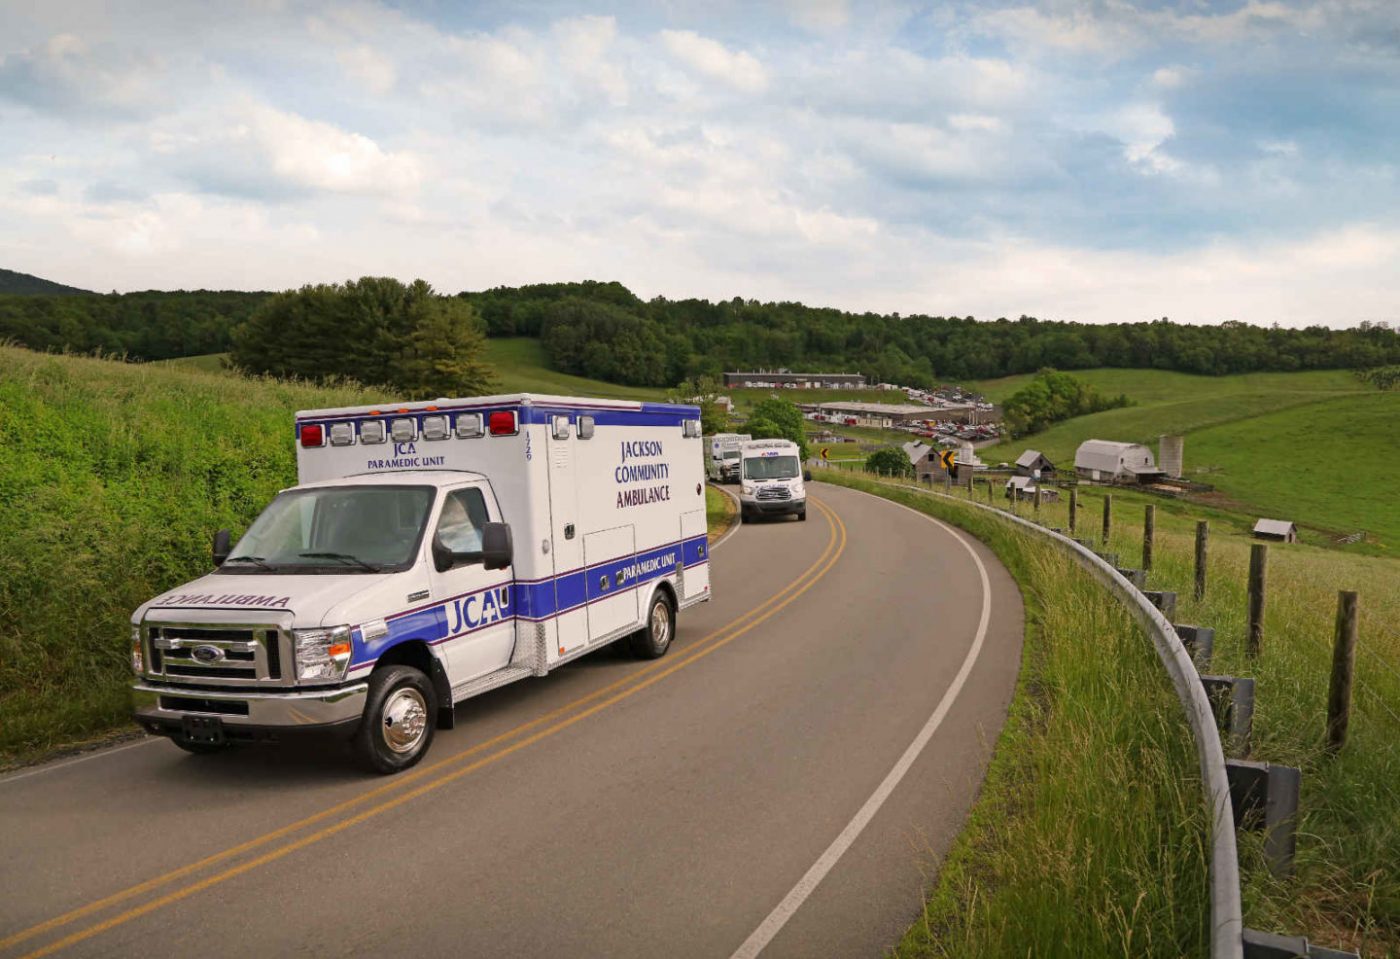 American Emergency Vehicles Becomes the First Ambulance Manufacturer to be Awarded a Green Certification from TRA